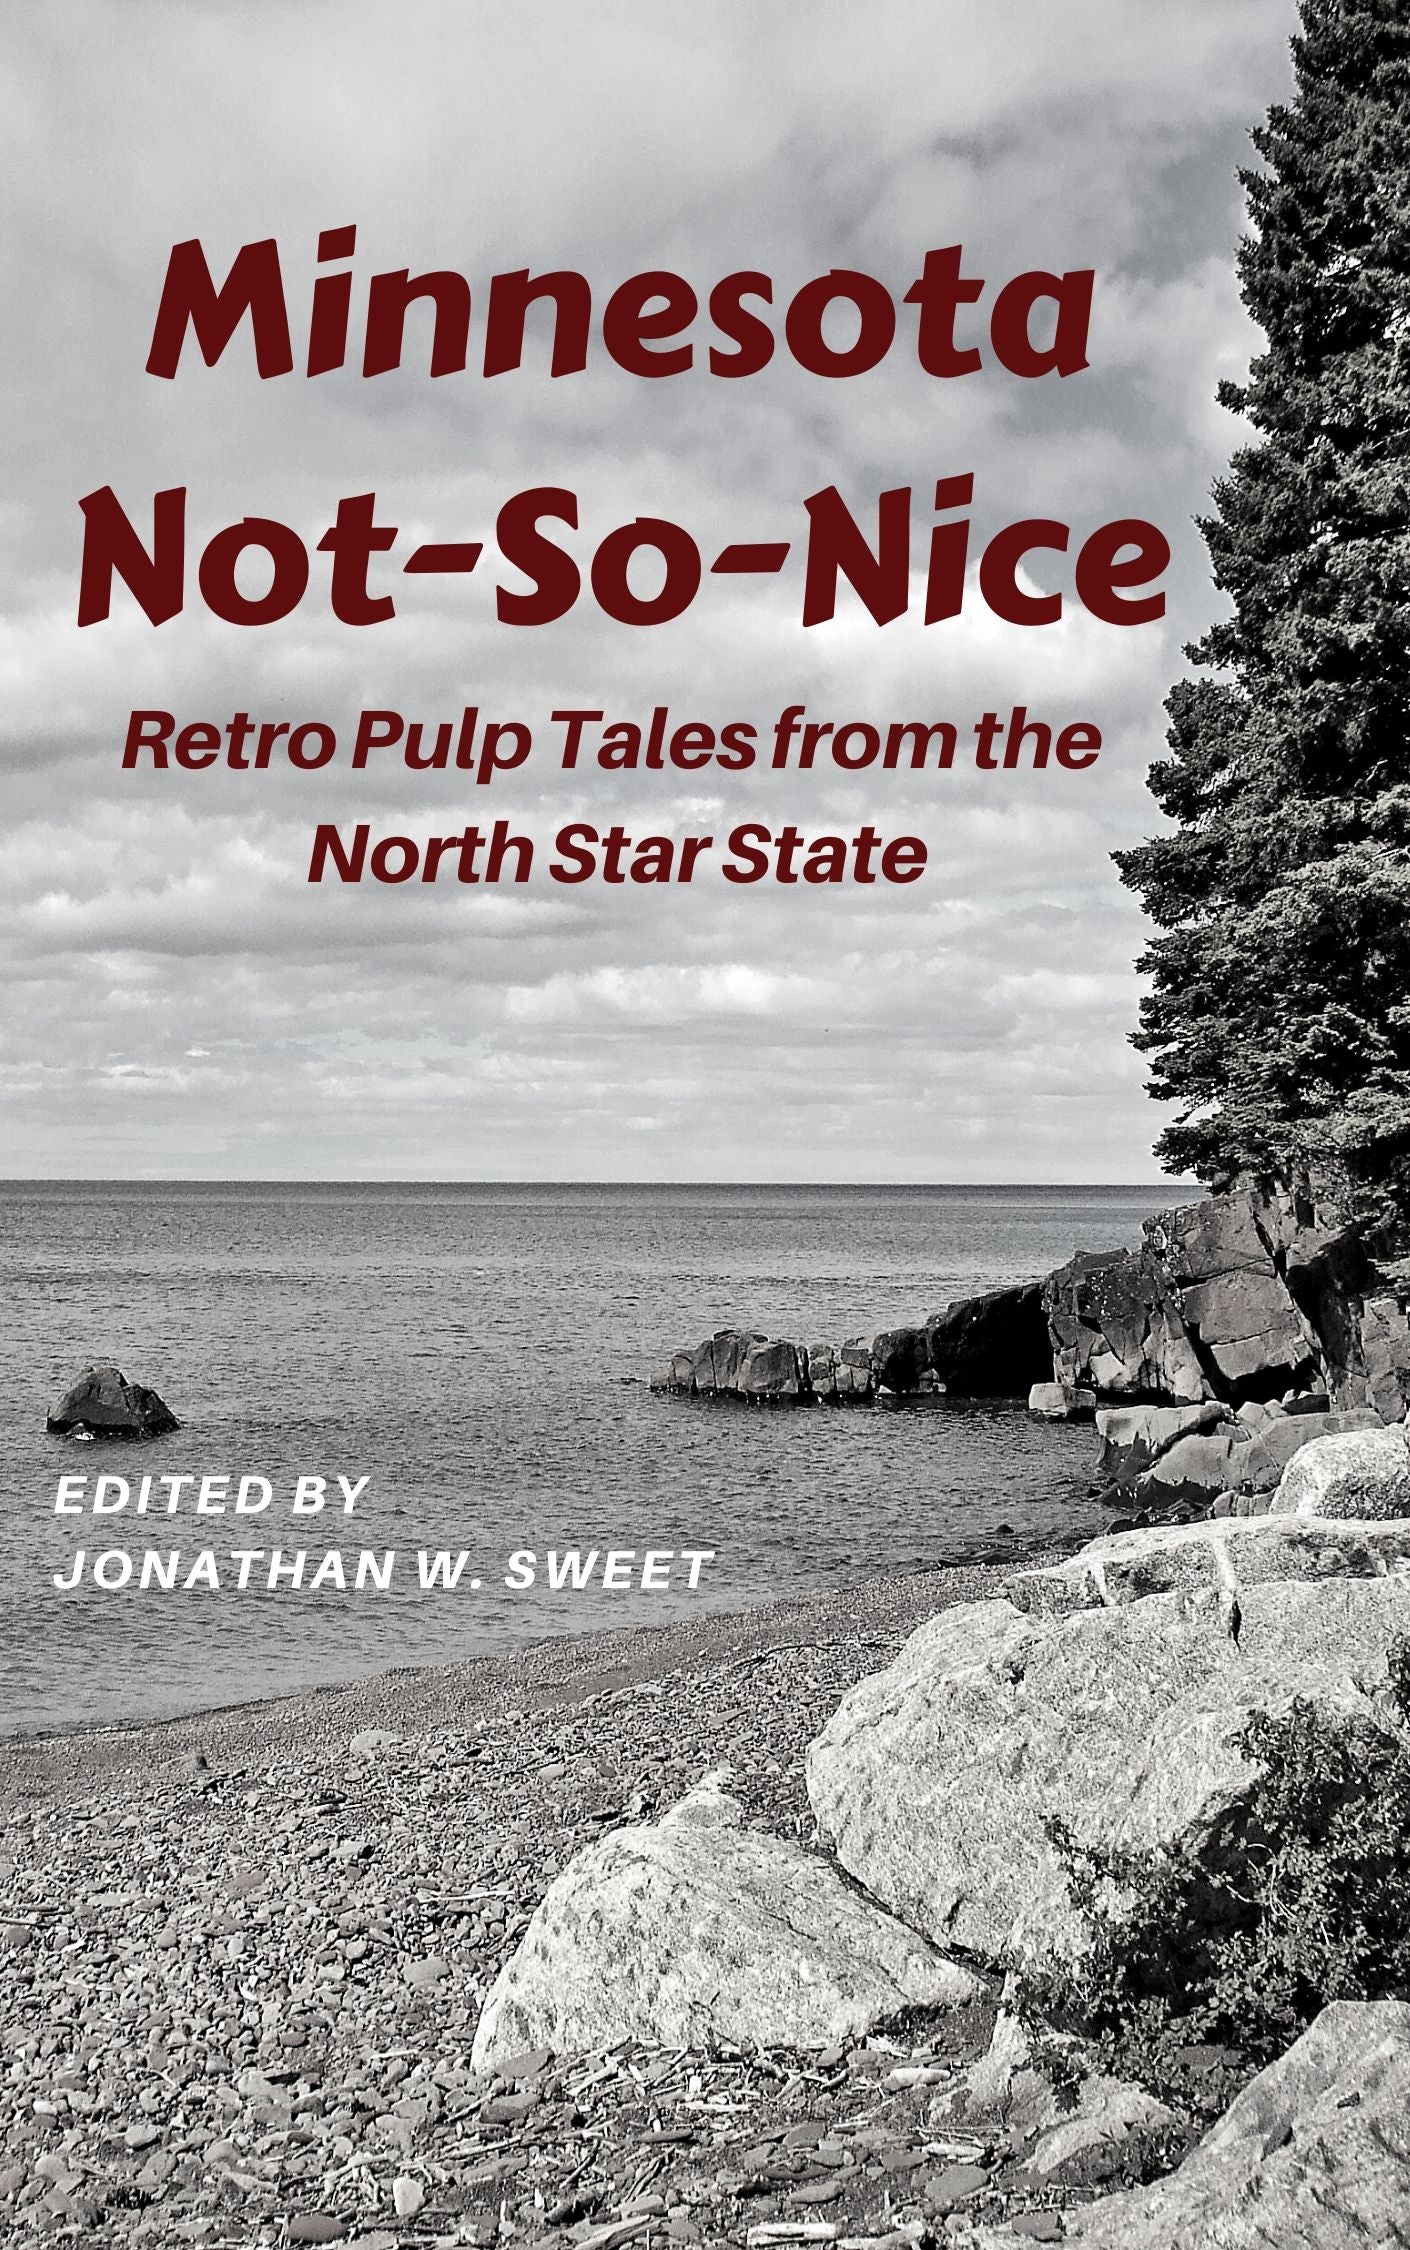 Minnesota Not-So-Nice: Retro Pulp Tales from the North Star State